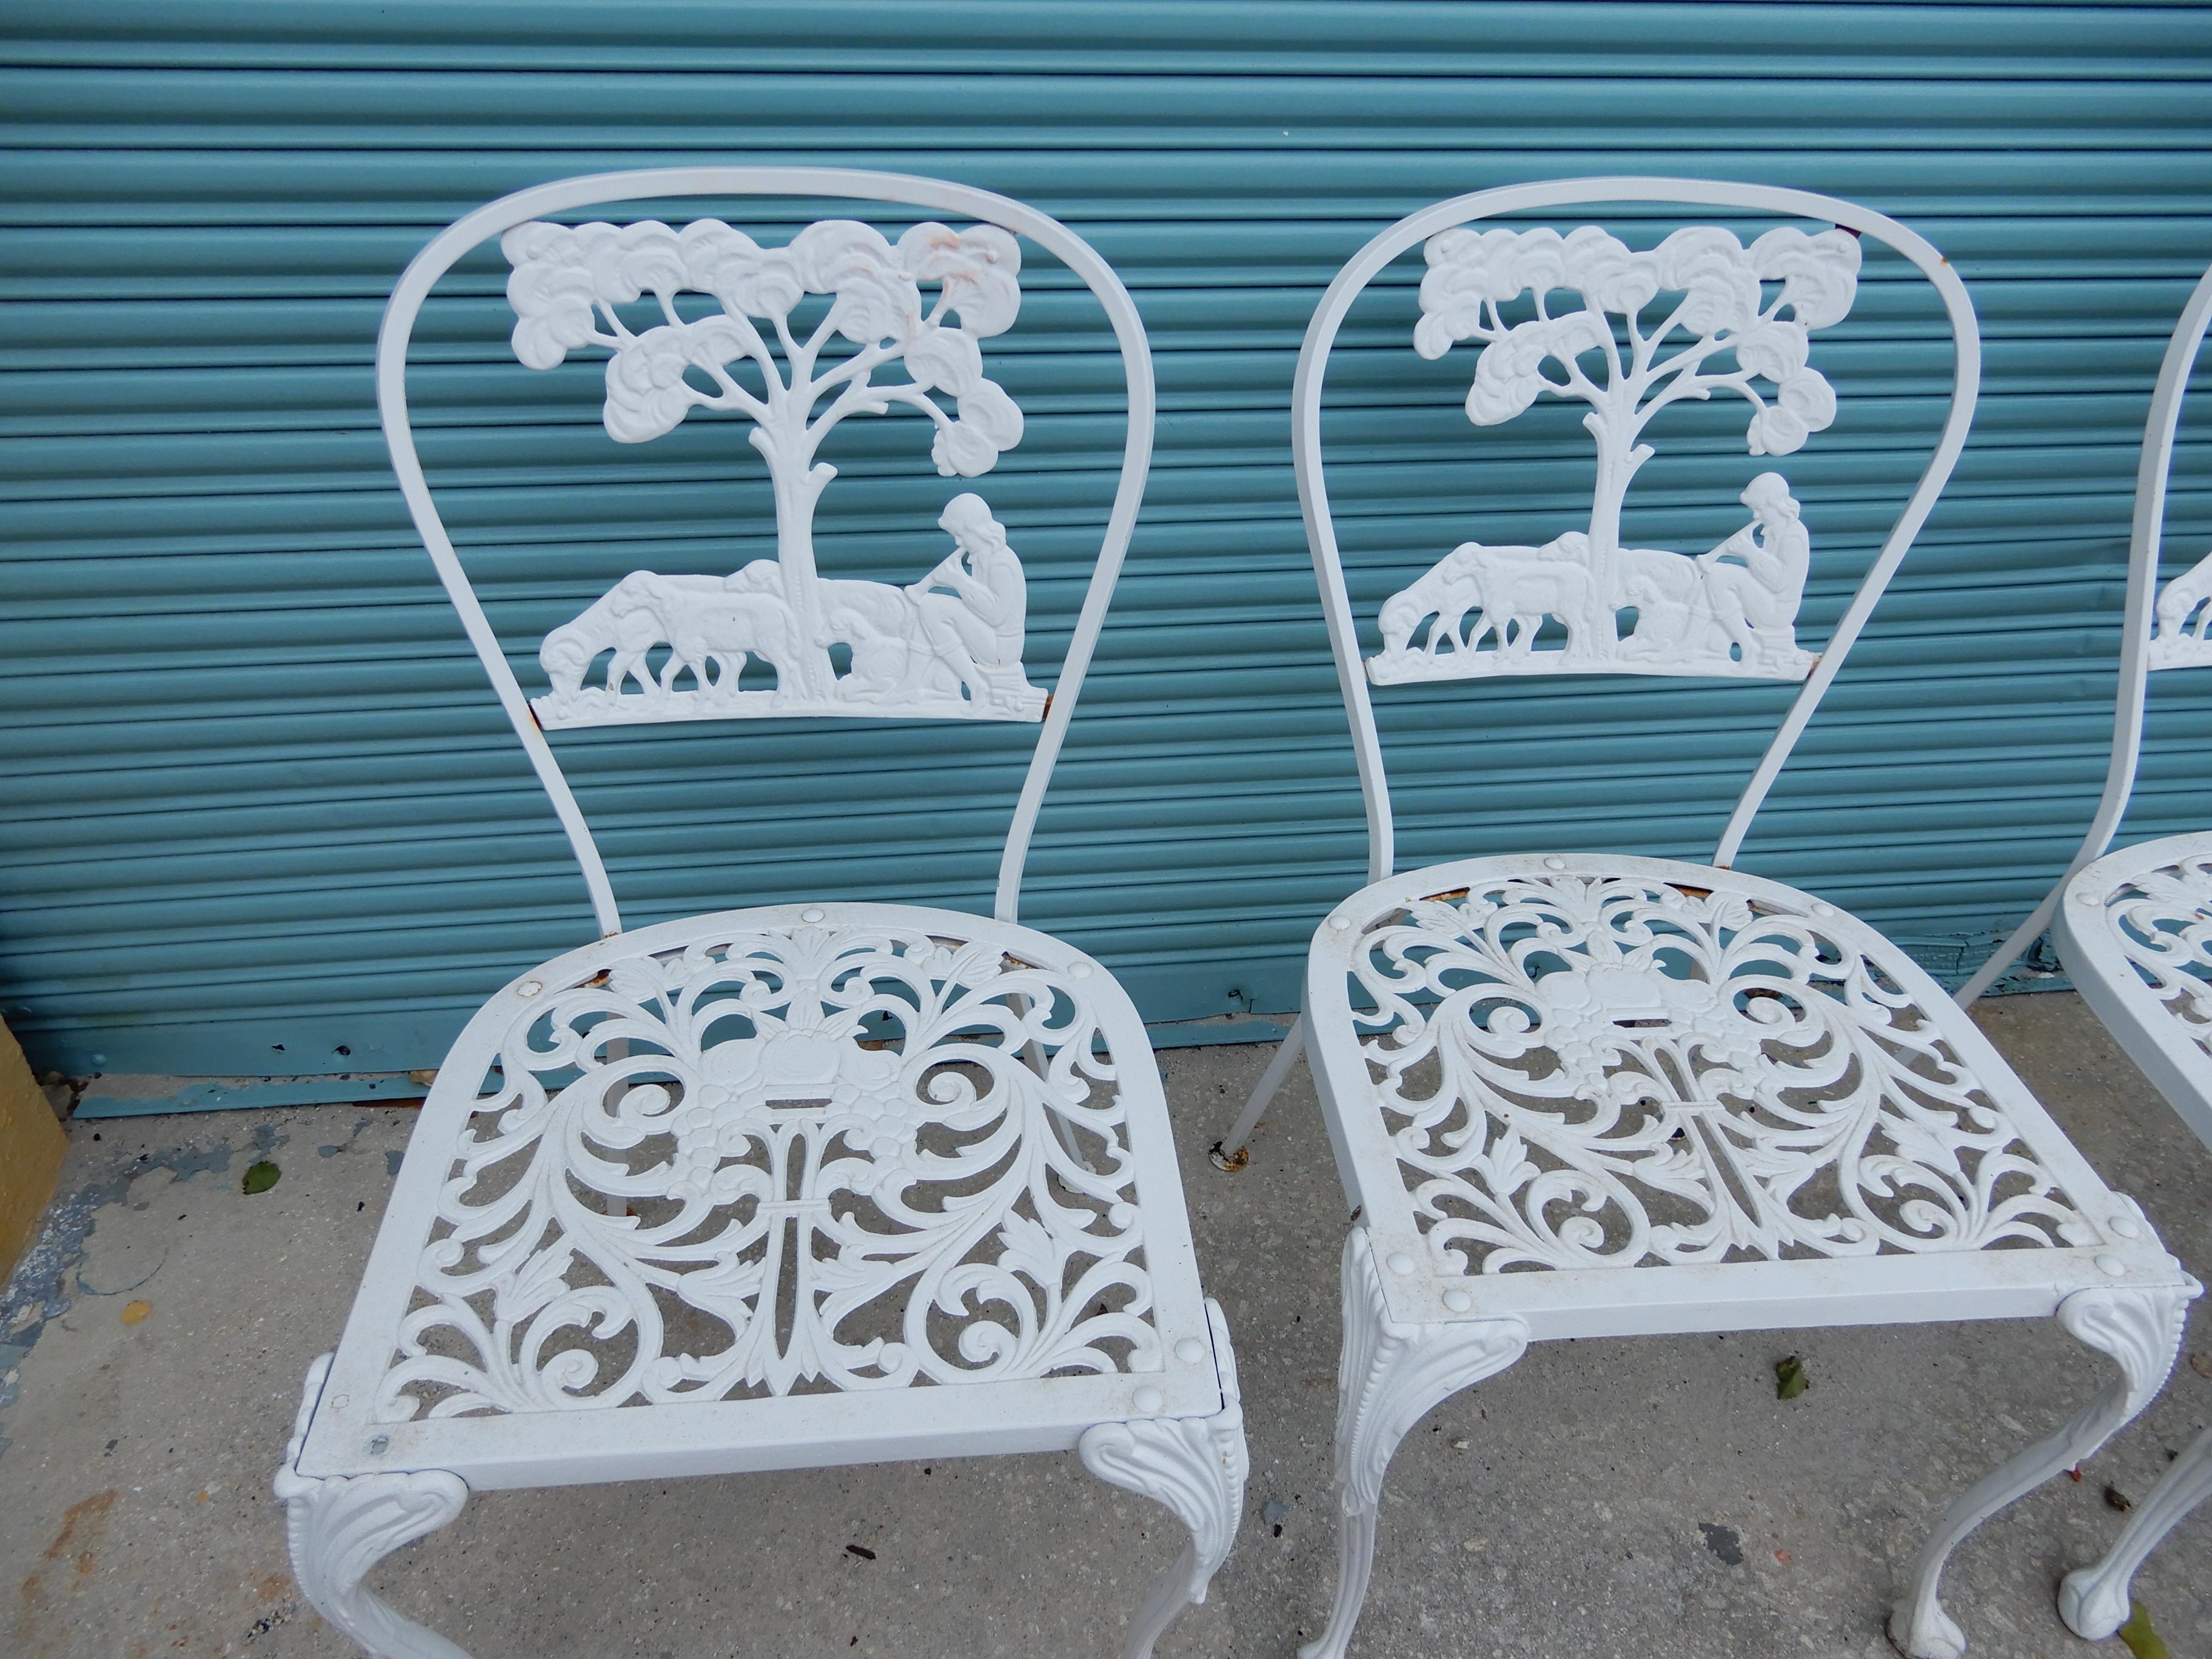 A set of 6 cast aluminum figural dining chairs. Molla who
worked on Long Island New York is best known for producing furniture in cast aluminum. The rare design of the chairs show a Shepard with his sheep sitting beneath a large tree. Molla is known